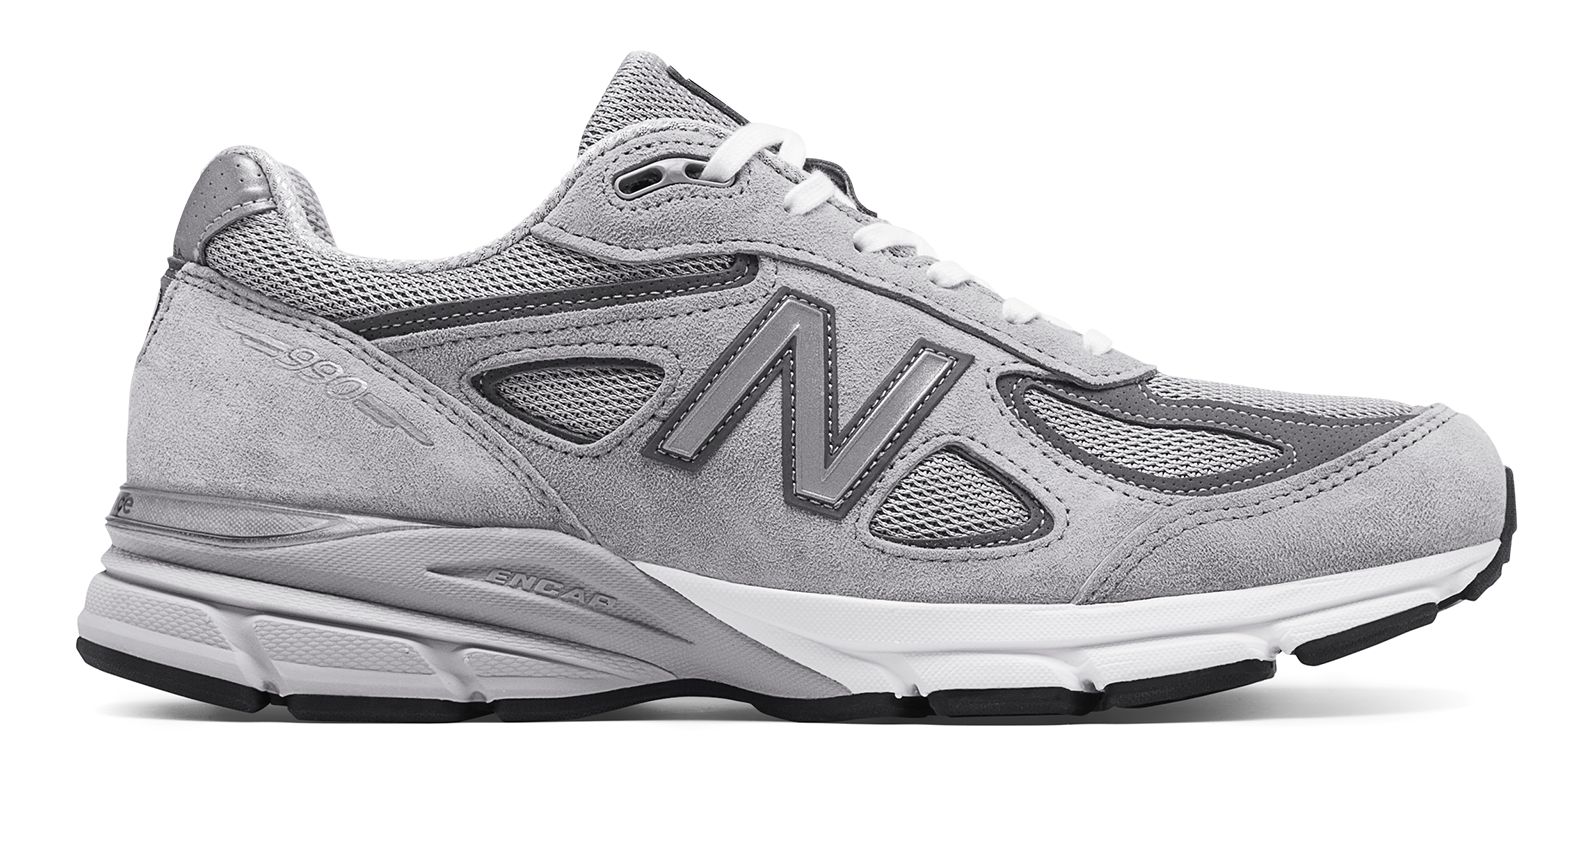 New Balance M990-V4 on Sale - Discounts Up to 51% Off on M990GL4 at Joe's New  Balance Outlet